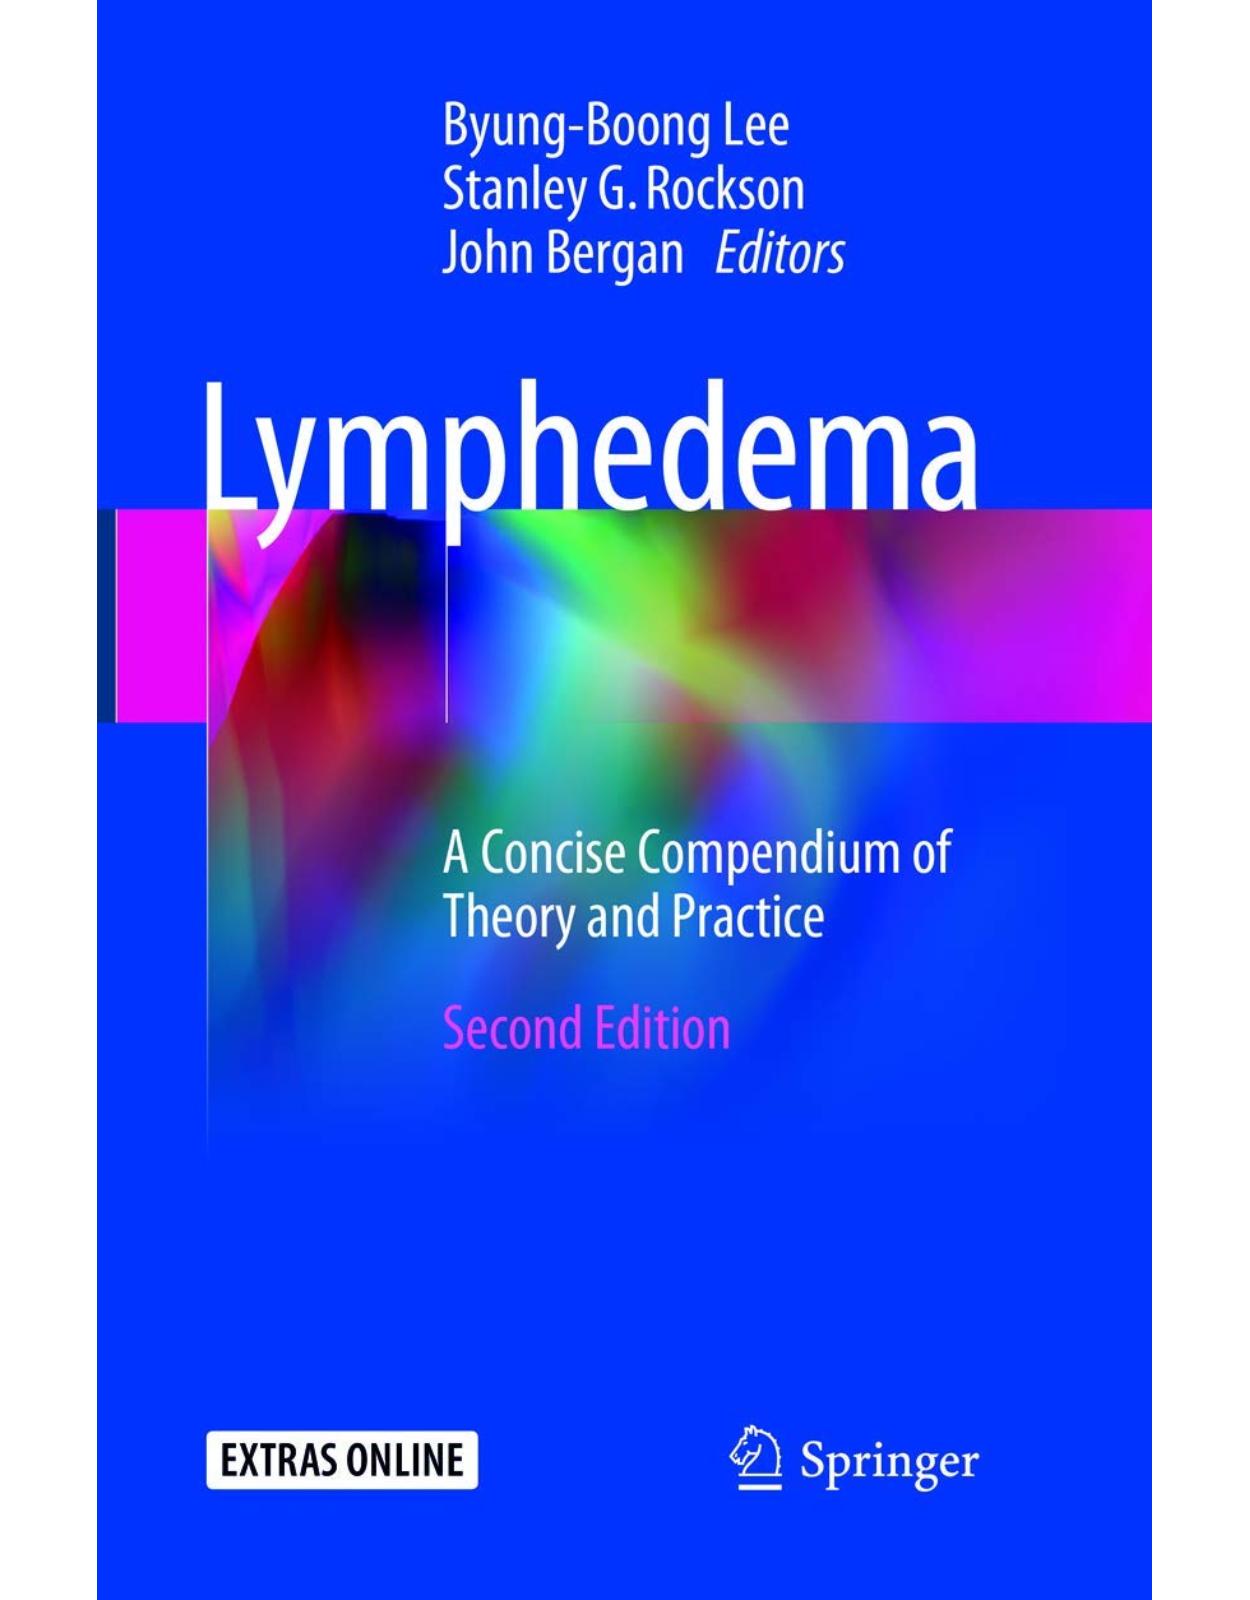 Lymphedema: A Concise Compendium of Theory and Practice